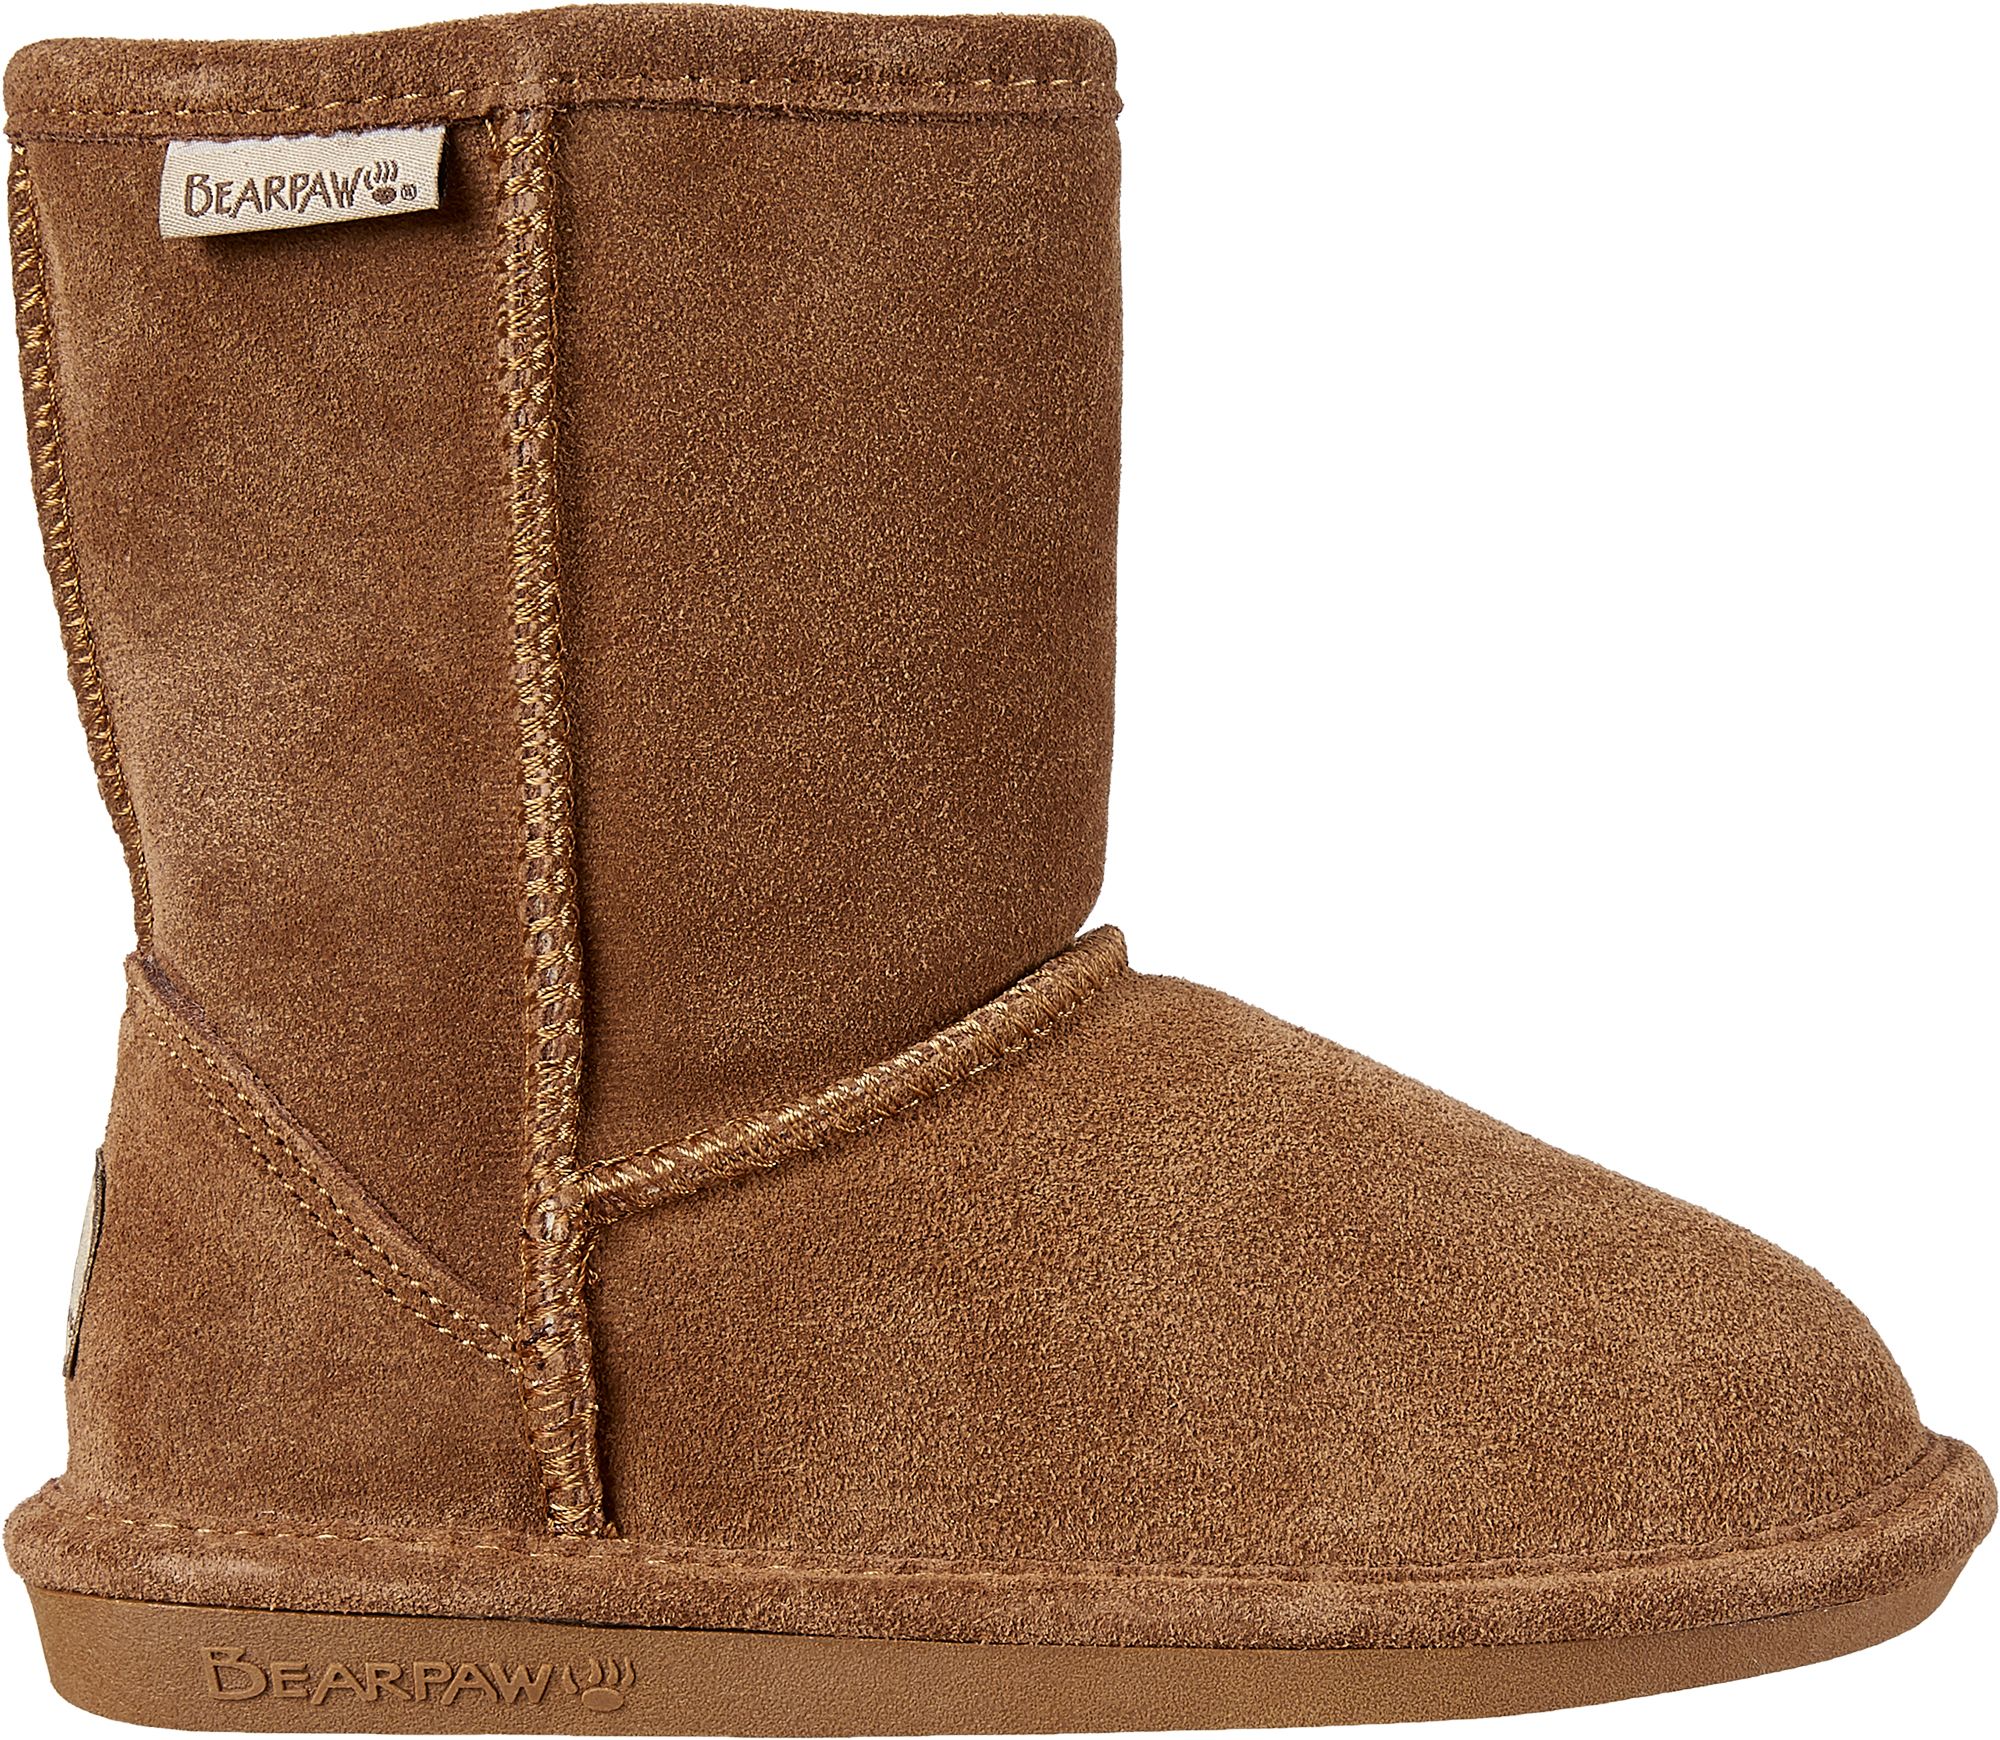 bearpaw boots with buttons